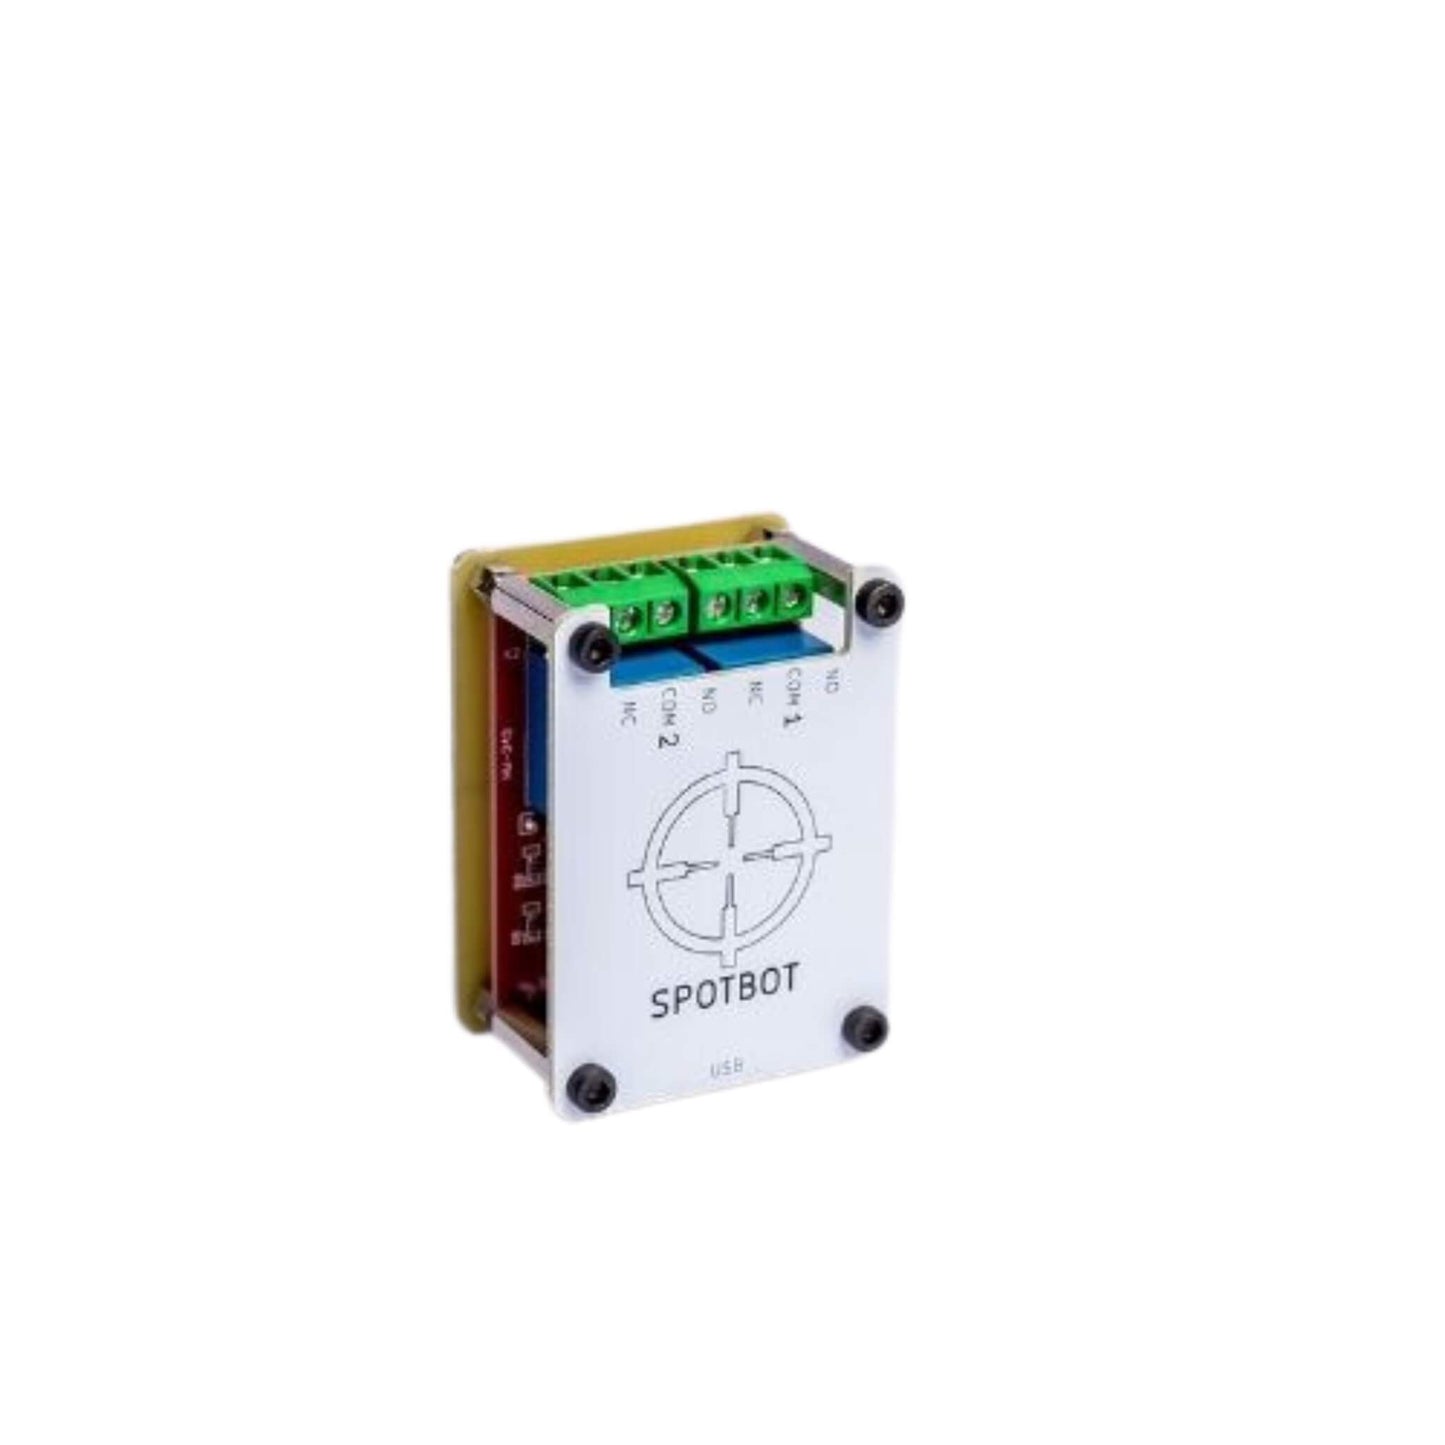 SPOTBOT USB Relay - Smart relay module for detection events, trigger sirens and more using relay switches.